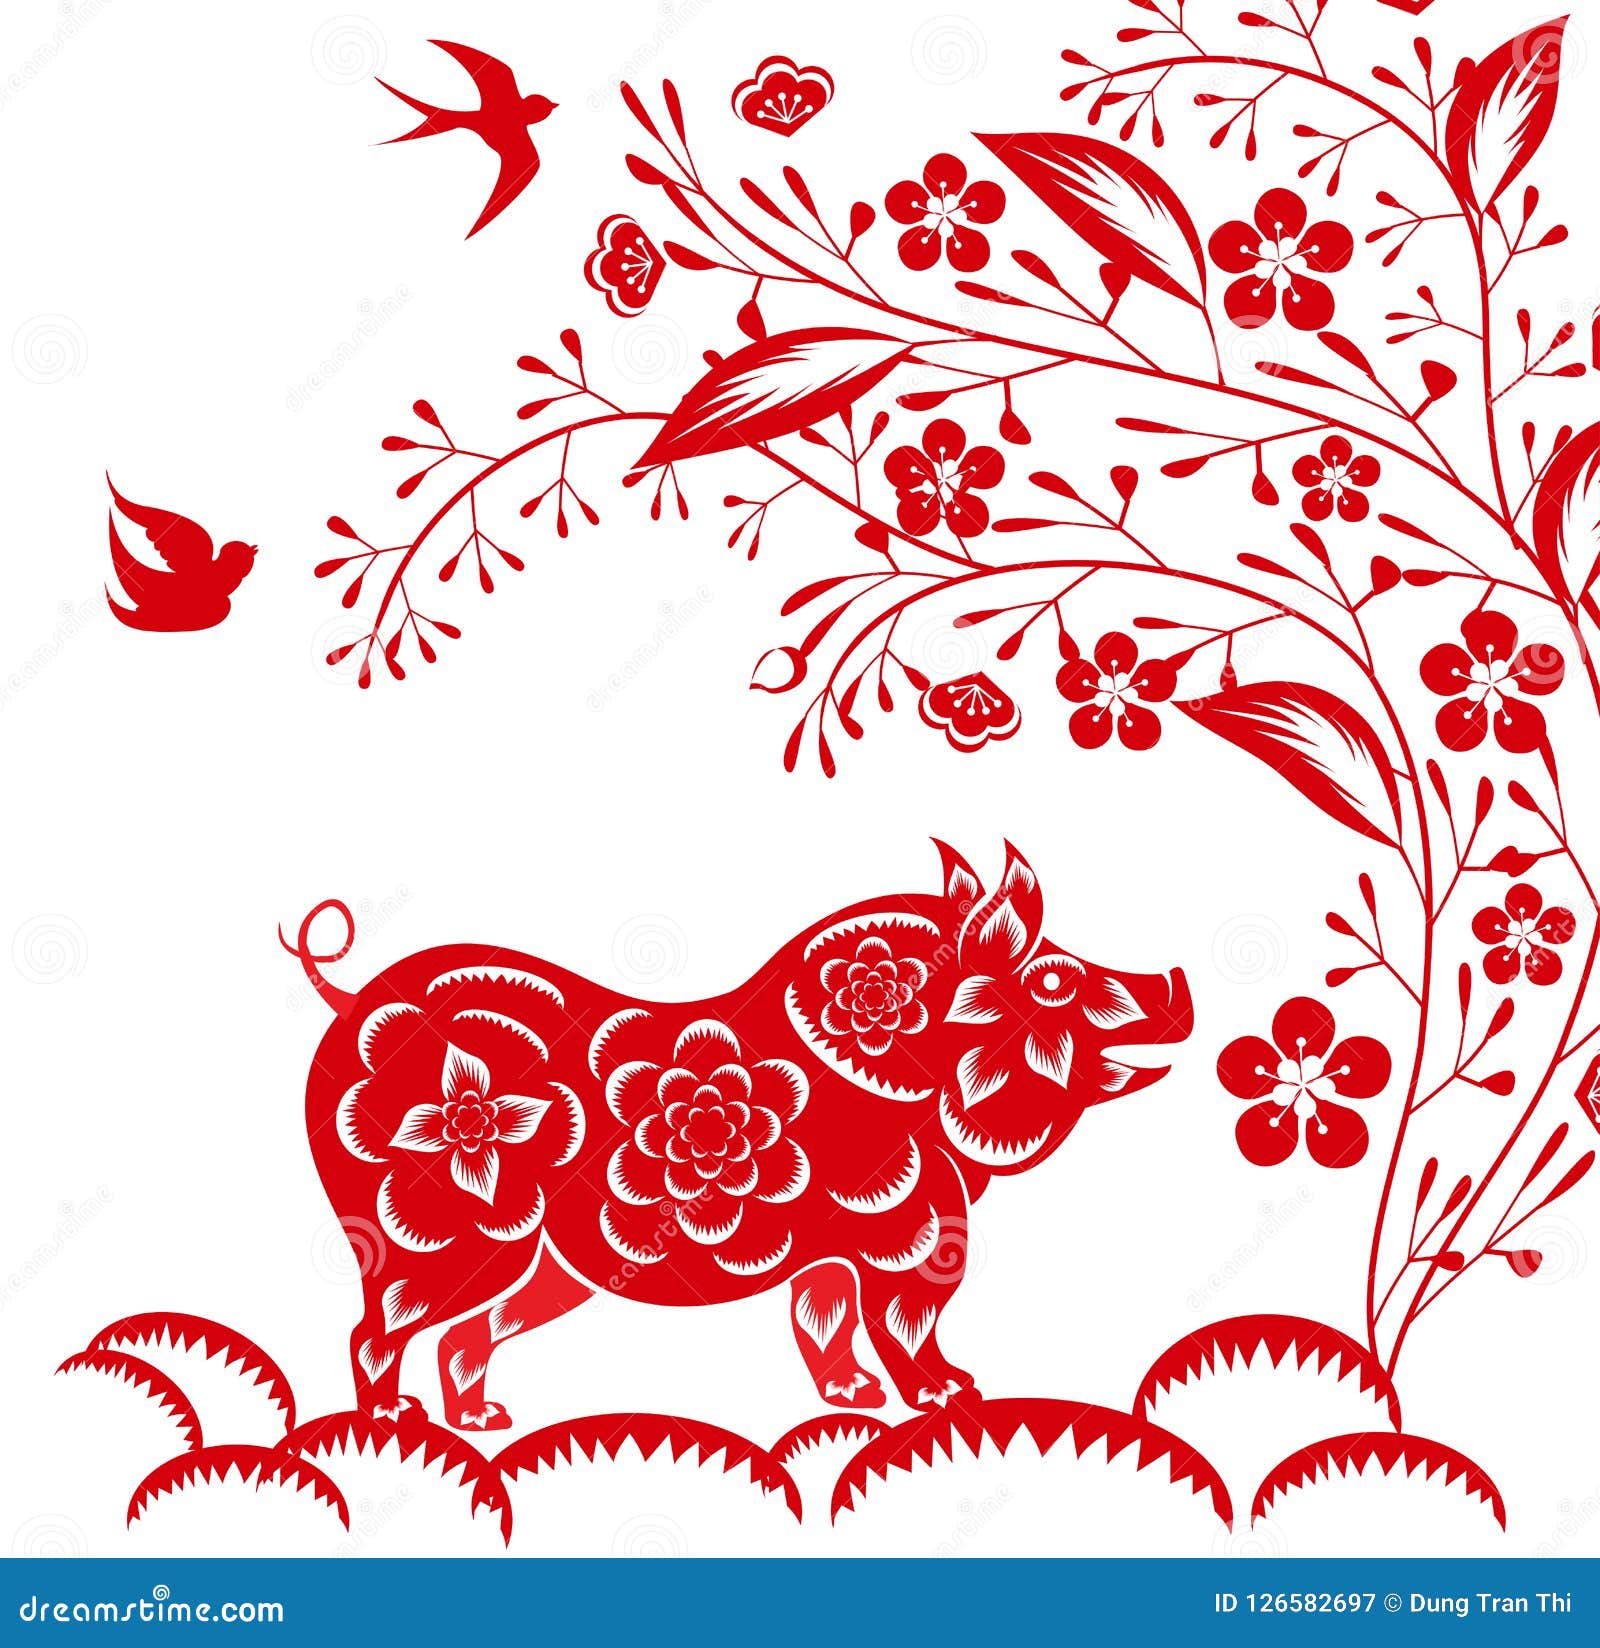 Happy Chinese New Year 2019 Year of the Pig. Lunar New Year Stock